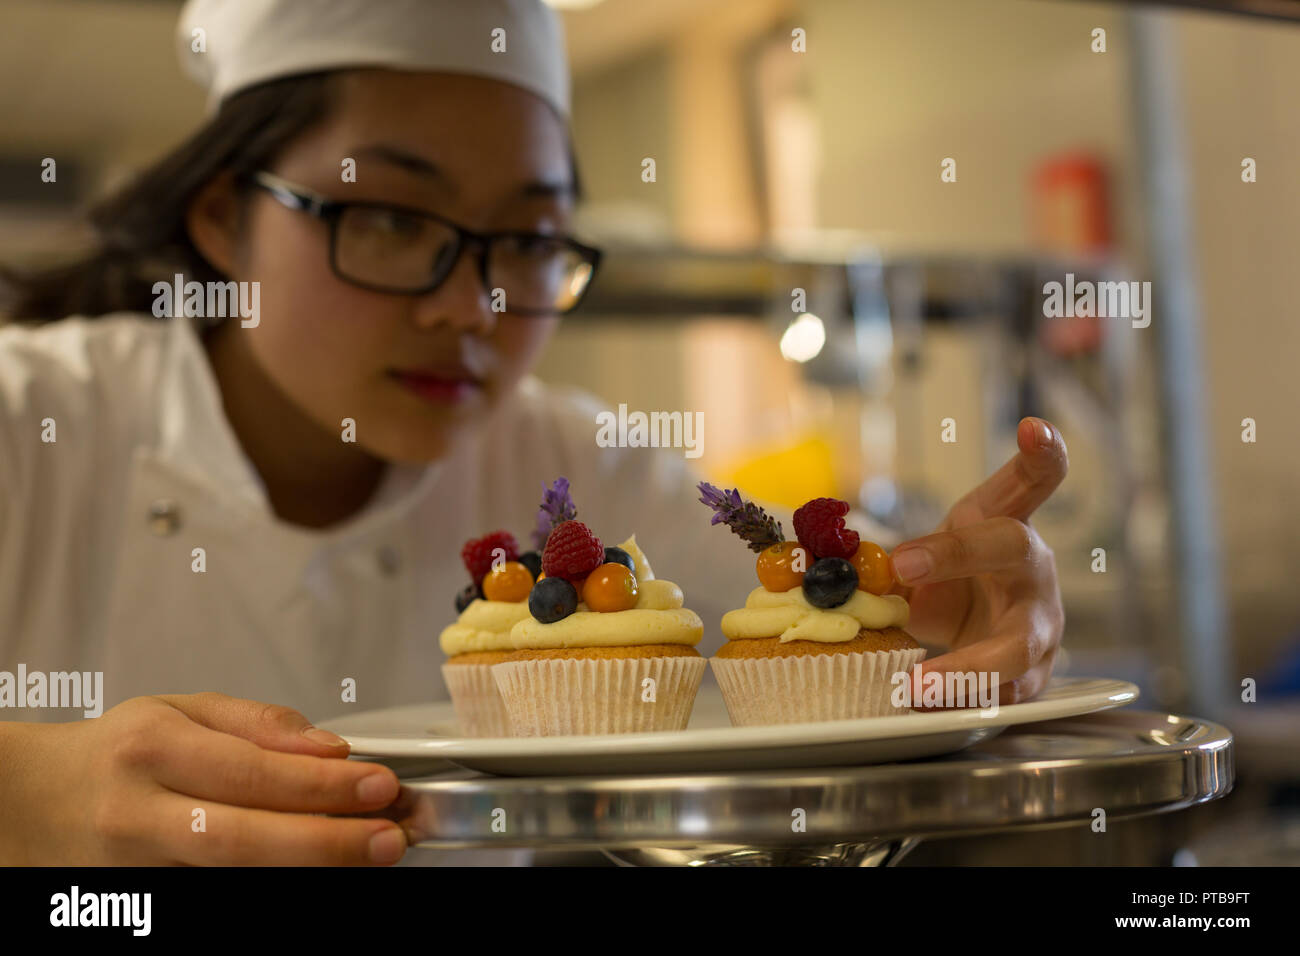 Female chef arranging muffins on a plate Stock Photo